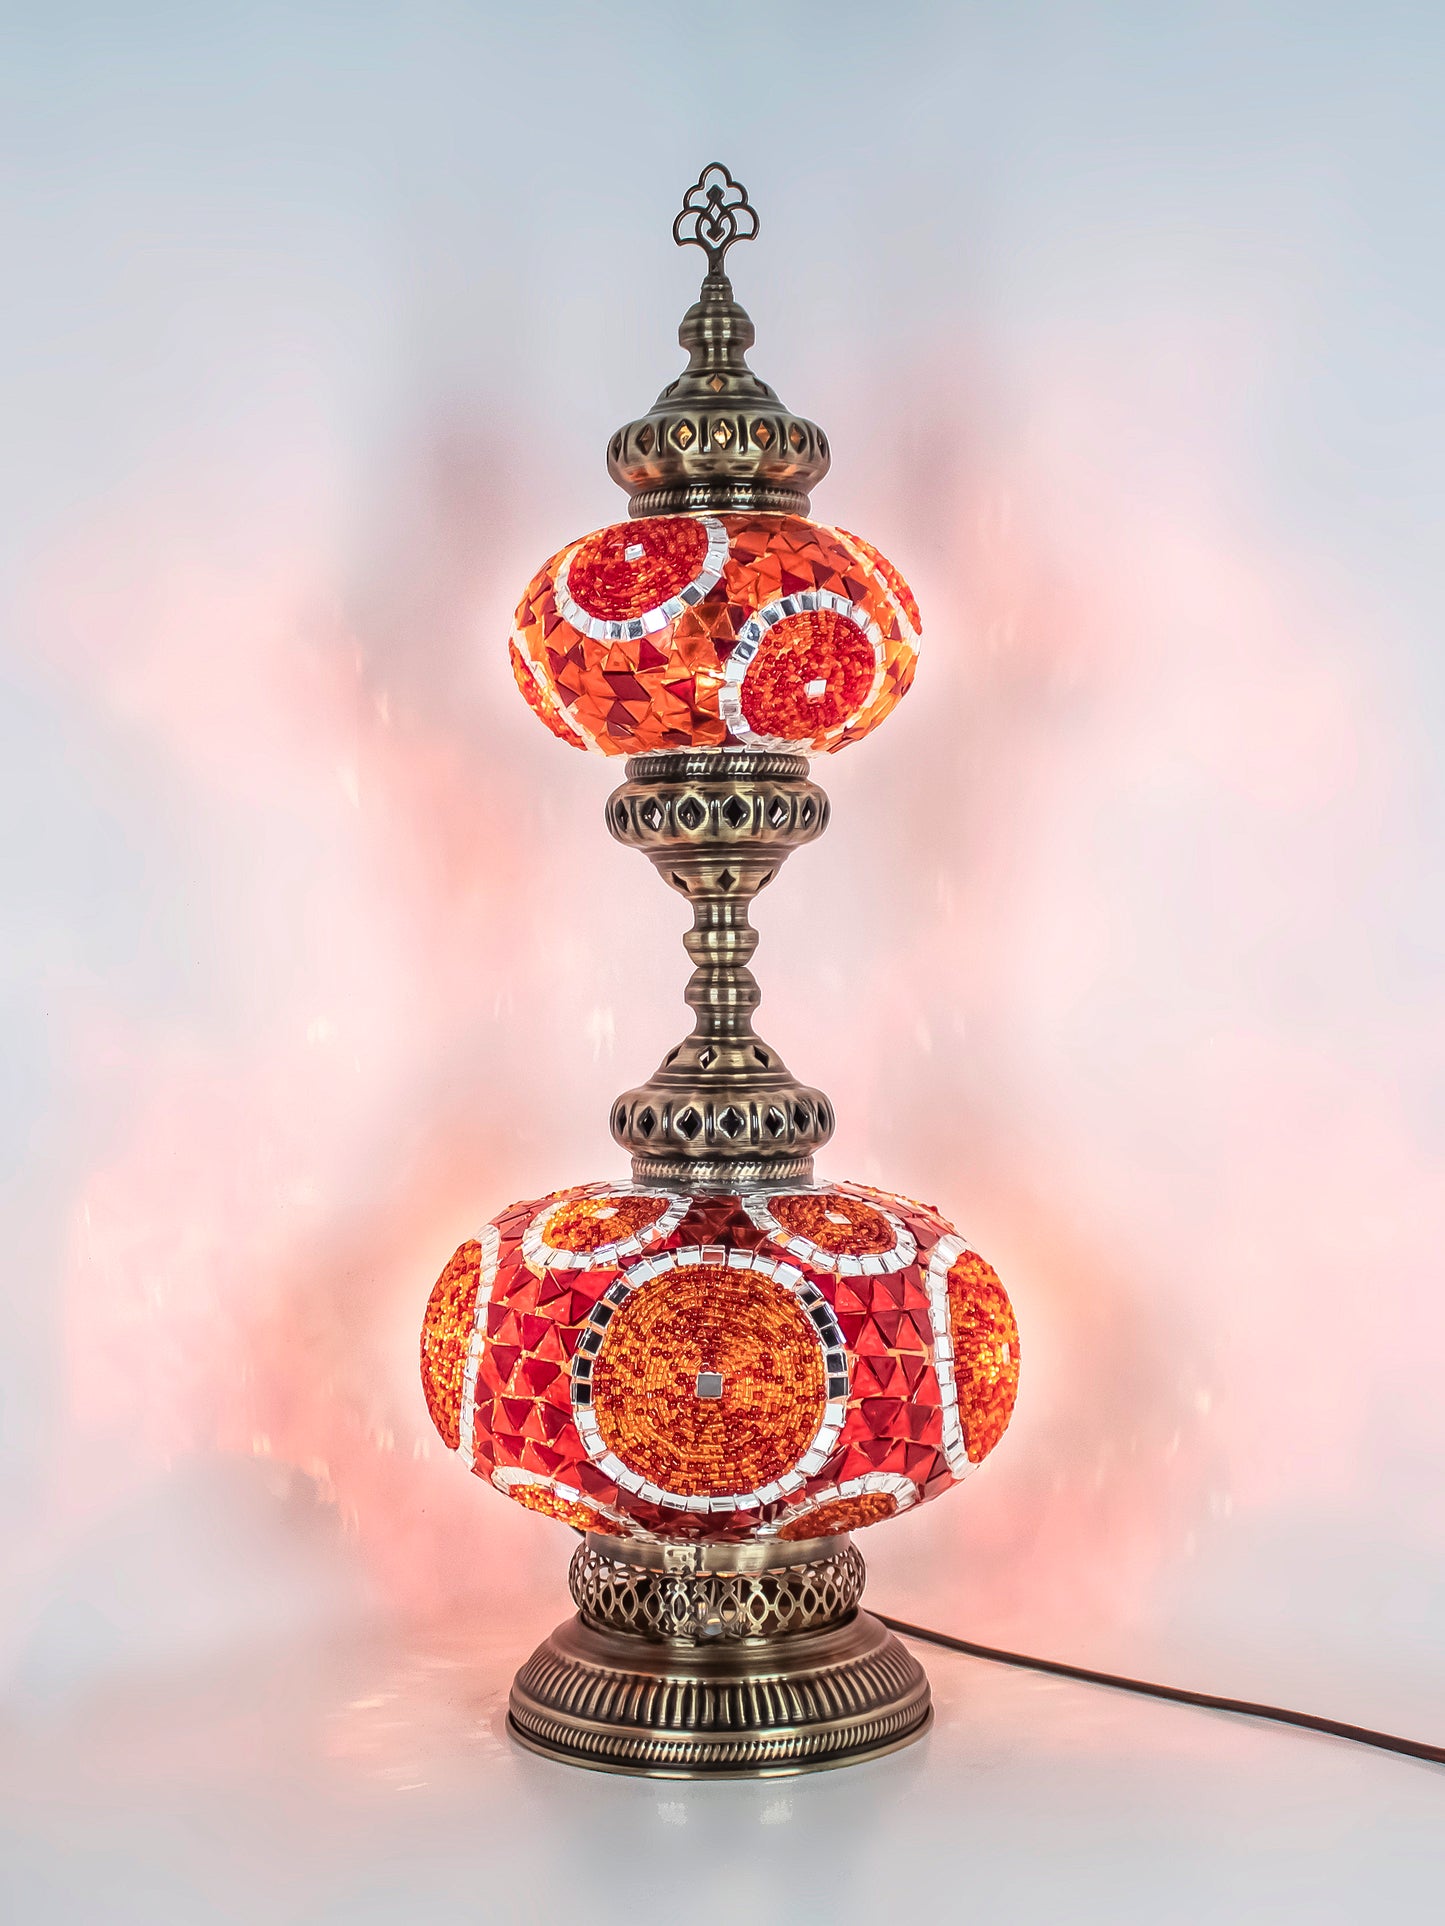 Turkish Mosaic Table Lamp 2-Globe Stained Glass